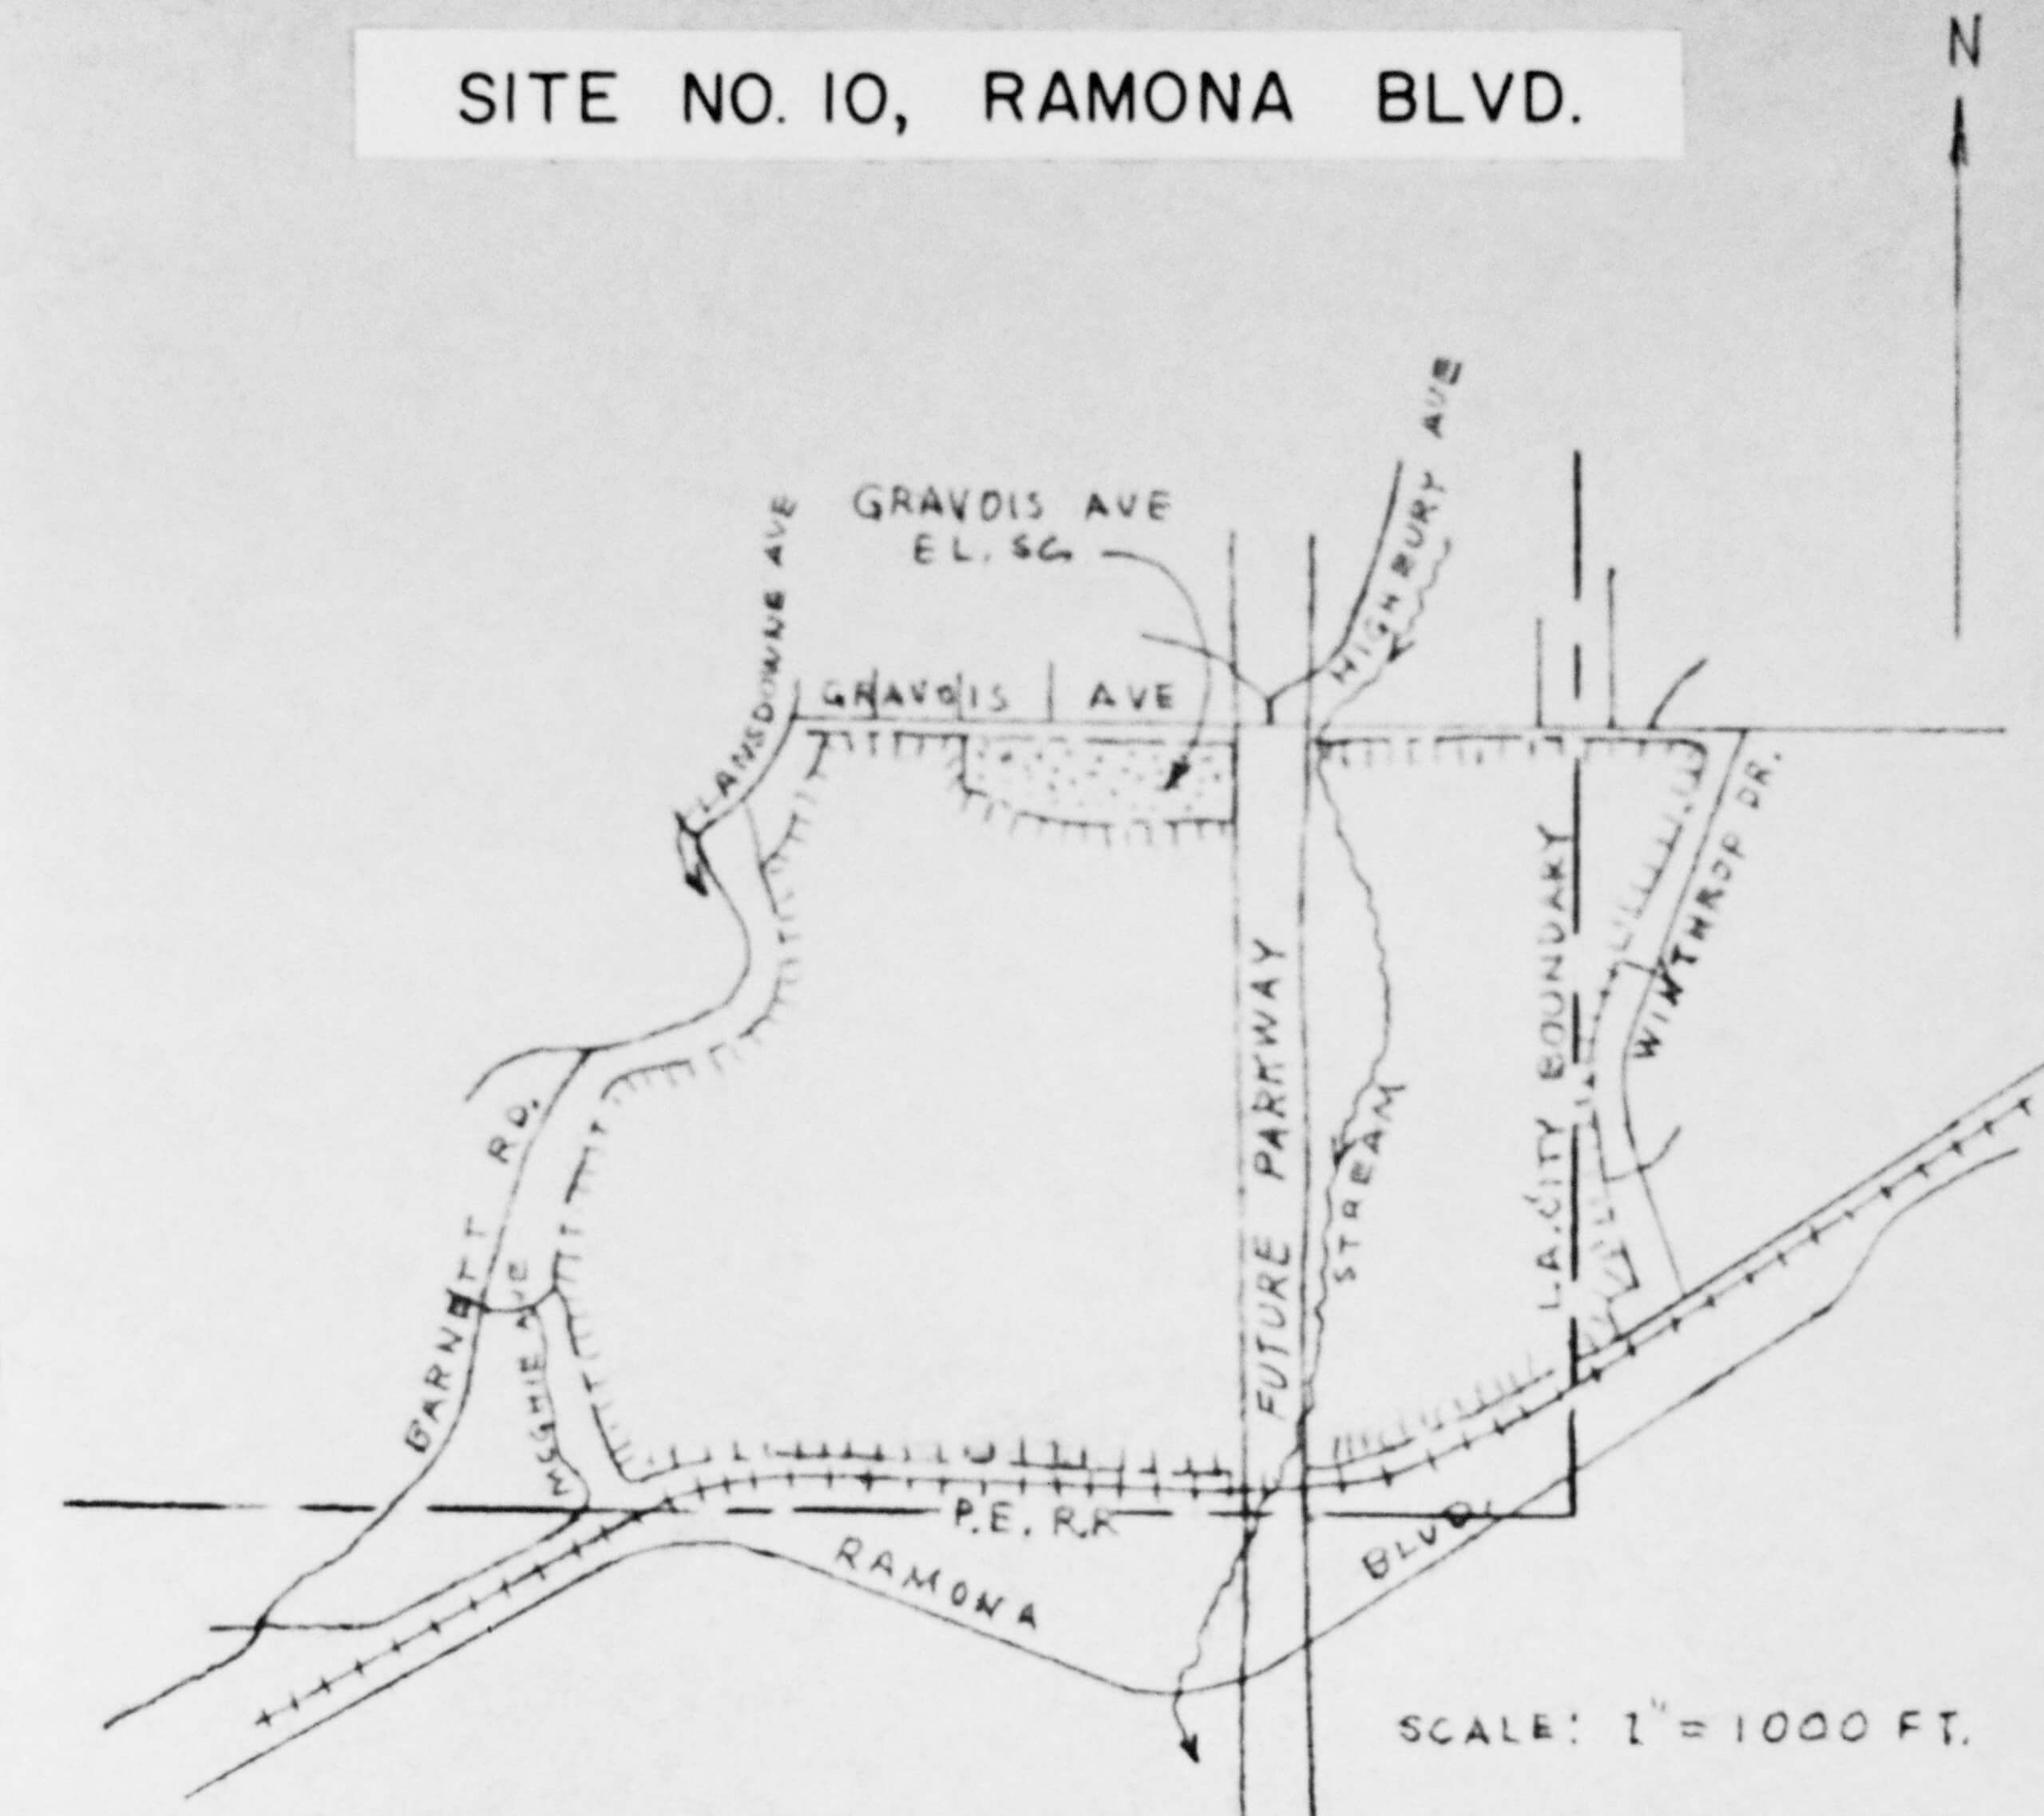 A plan drawing of the Ramona site campus.